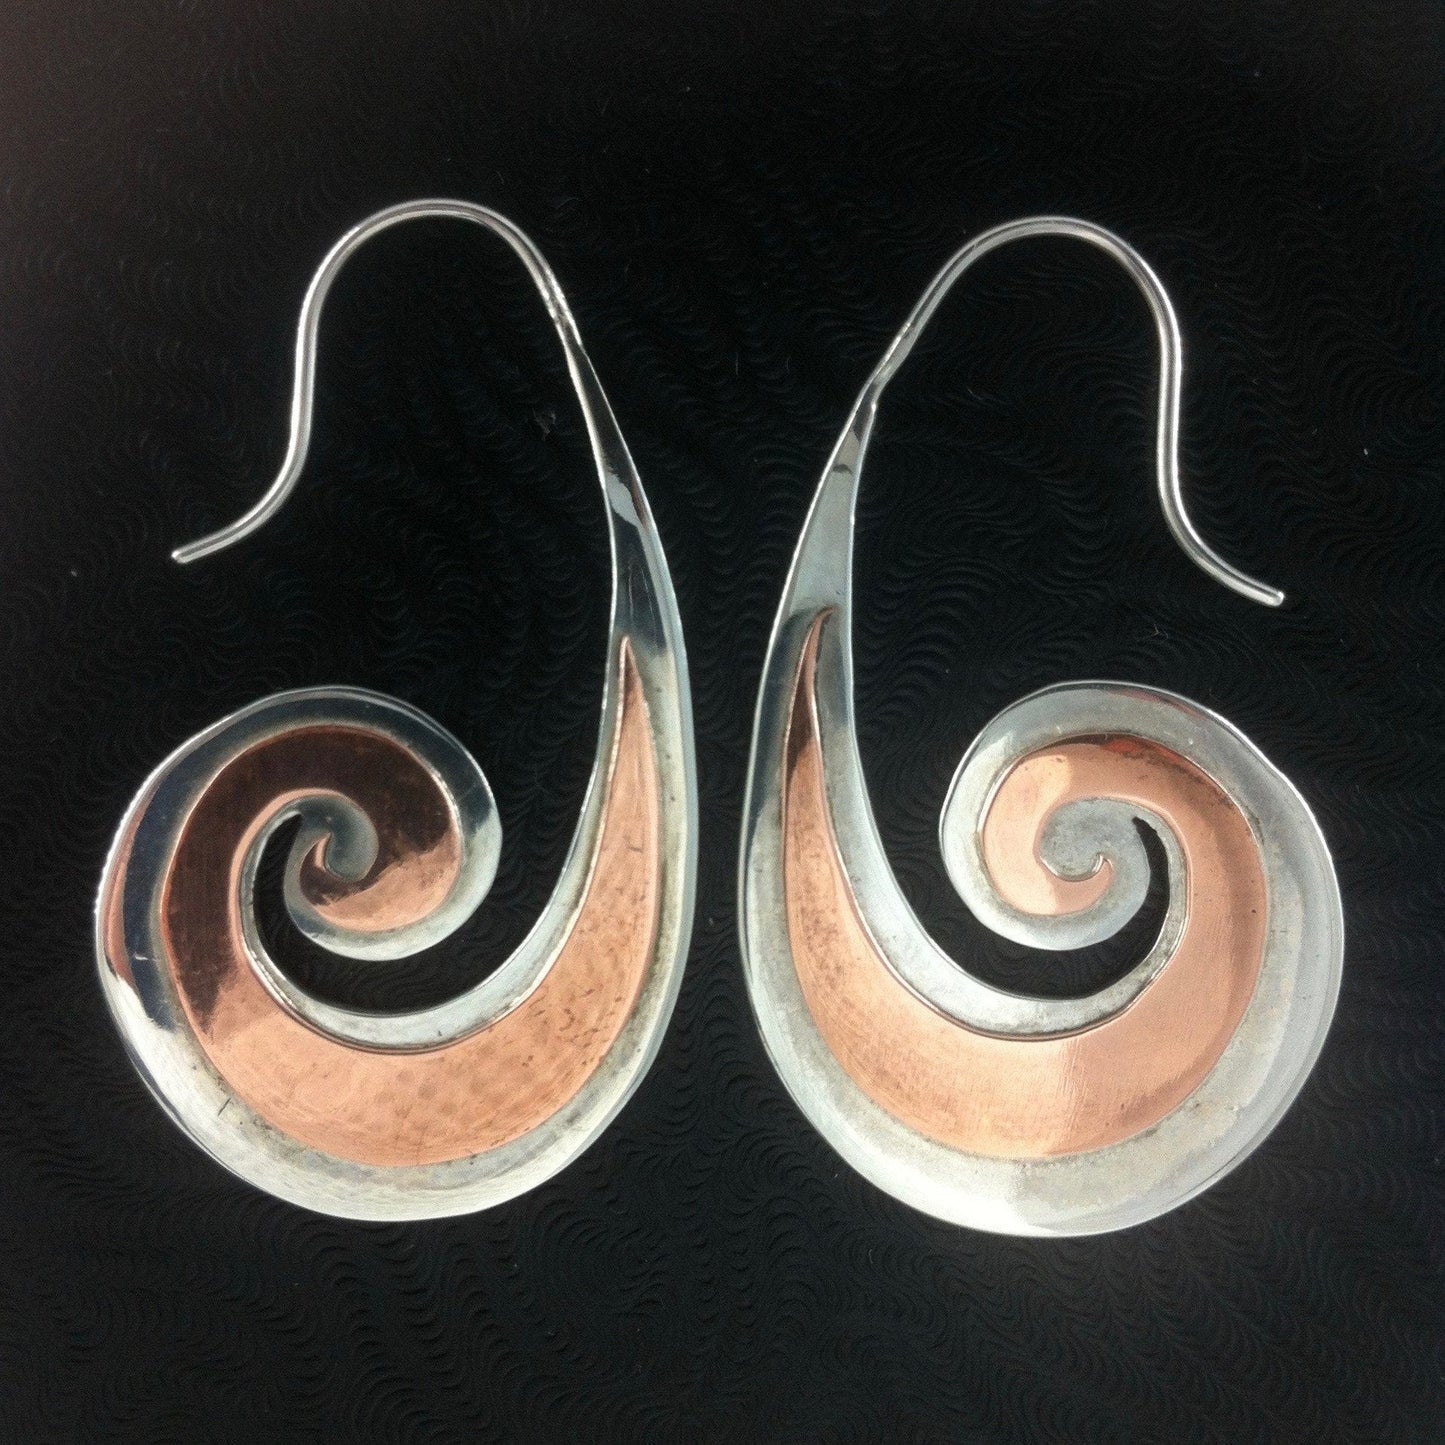 Tribal Earrings :|: Heavy Spiral. sterling silver with copper highlights earrings.